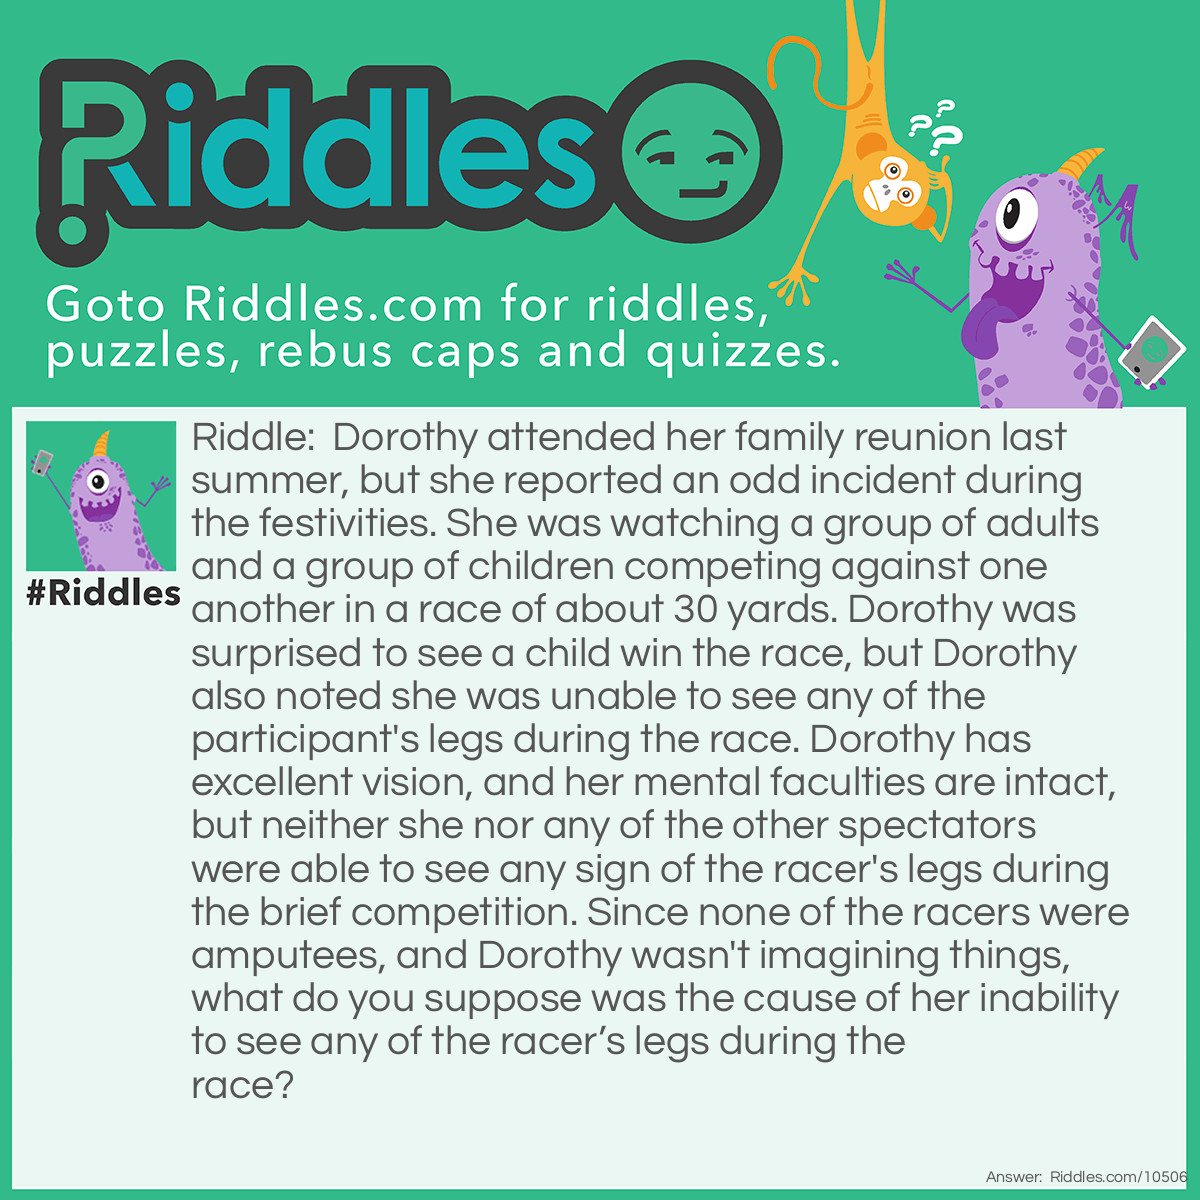 Riddle: Dorothy attended her family reunion last summer, but she reported an odd incident during the festivities. She was watching a group of adults and a group of children competing against one another in a race of about 30 yards. Dorothy was surprised to see a child win the race, but Dorothy also noted she was unable to see any of the participant's legs during the race. Dorothy has excellent vision, and her mental faculties are intact, but neither she nor any of the other spectators were able to see any sign of the racer's legs during the brief competition. Since none of the racers were amputees, and Dorothy wasn't imagining things, what do you suppose was the cause of her inability to see any of the racer’s legs during the race? Answer: The adults and children were participating in a sack race at the family reunion.